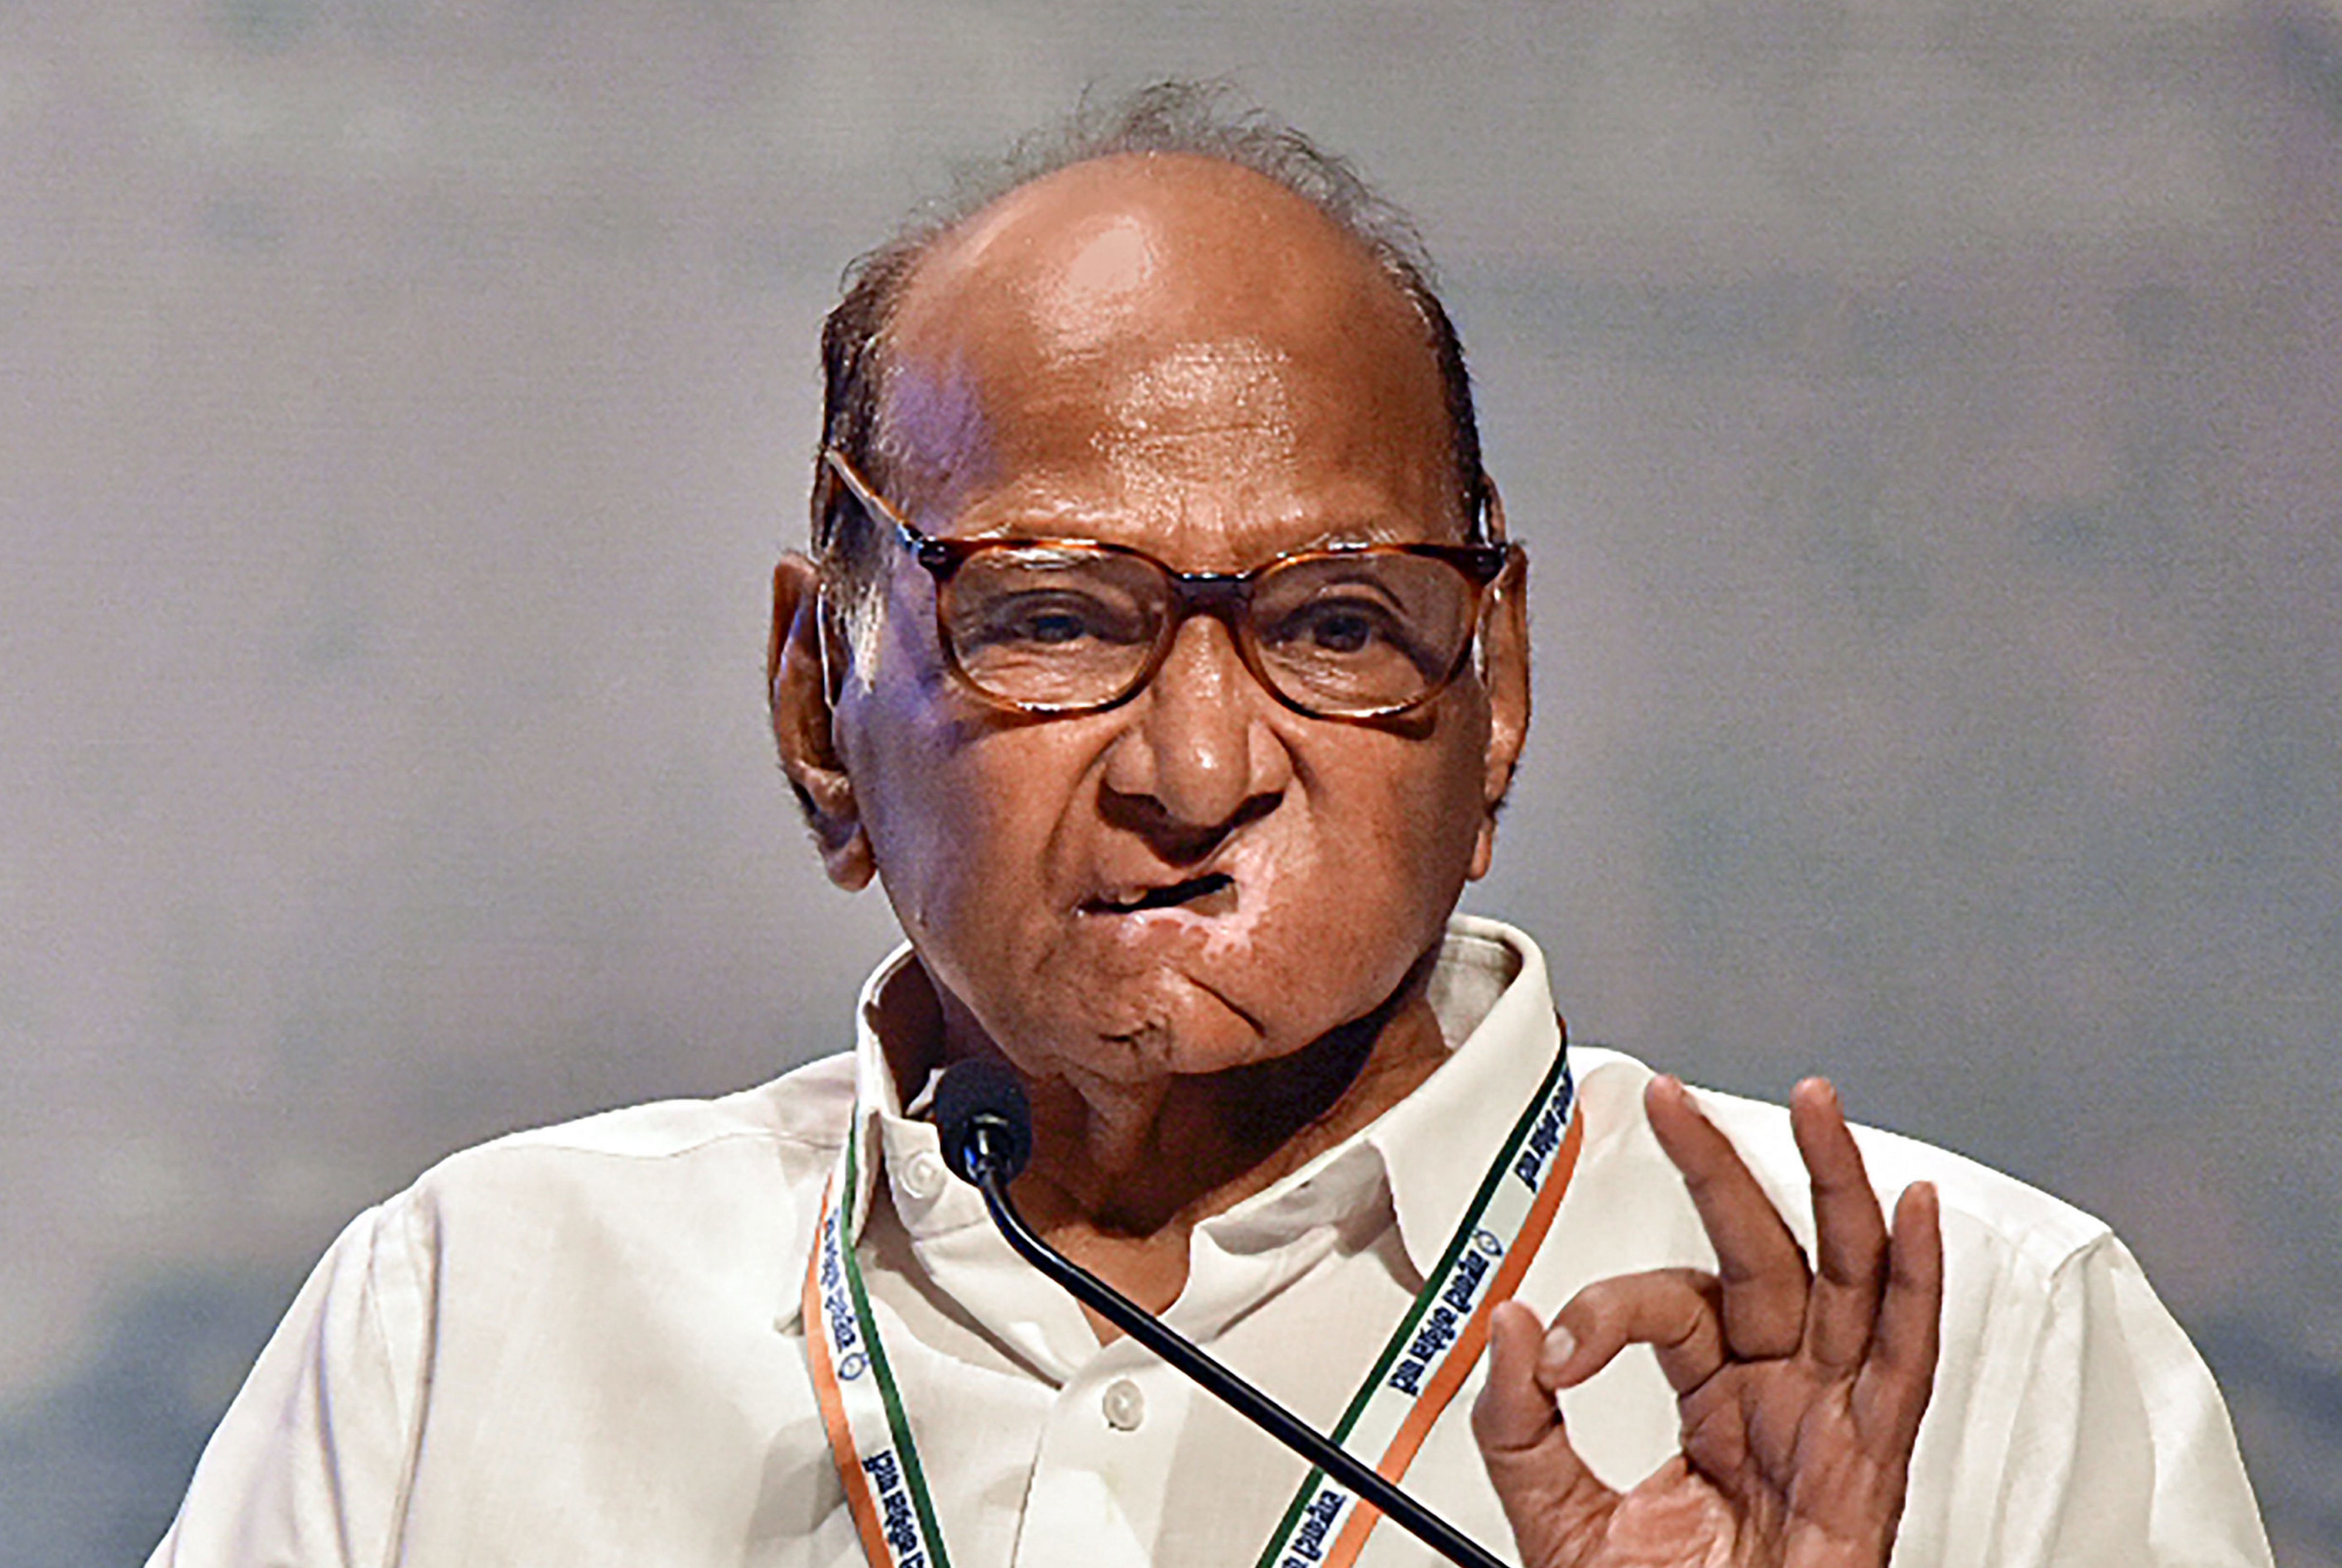 ls polls: supriya’s victory will reduce support for modi by one mp in parliament, says sharad pawar